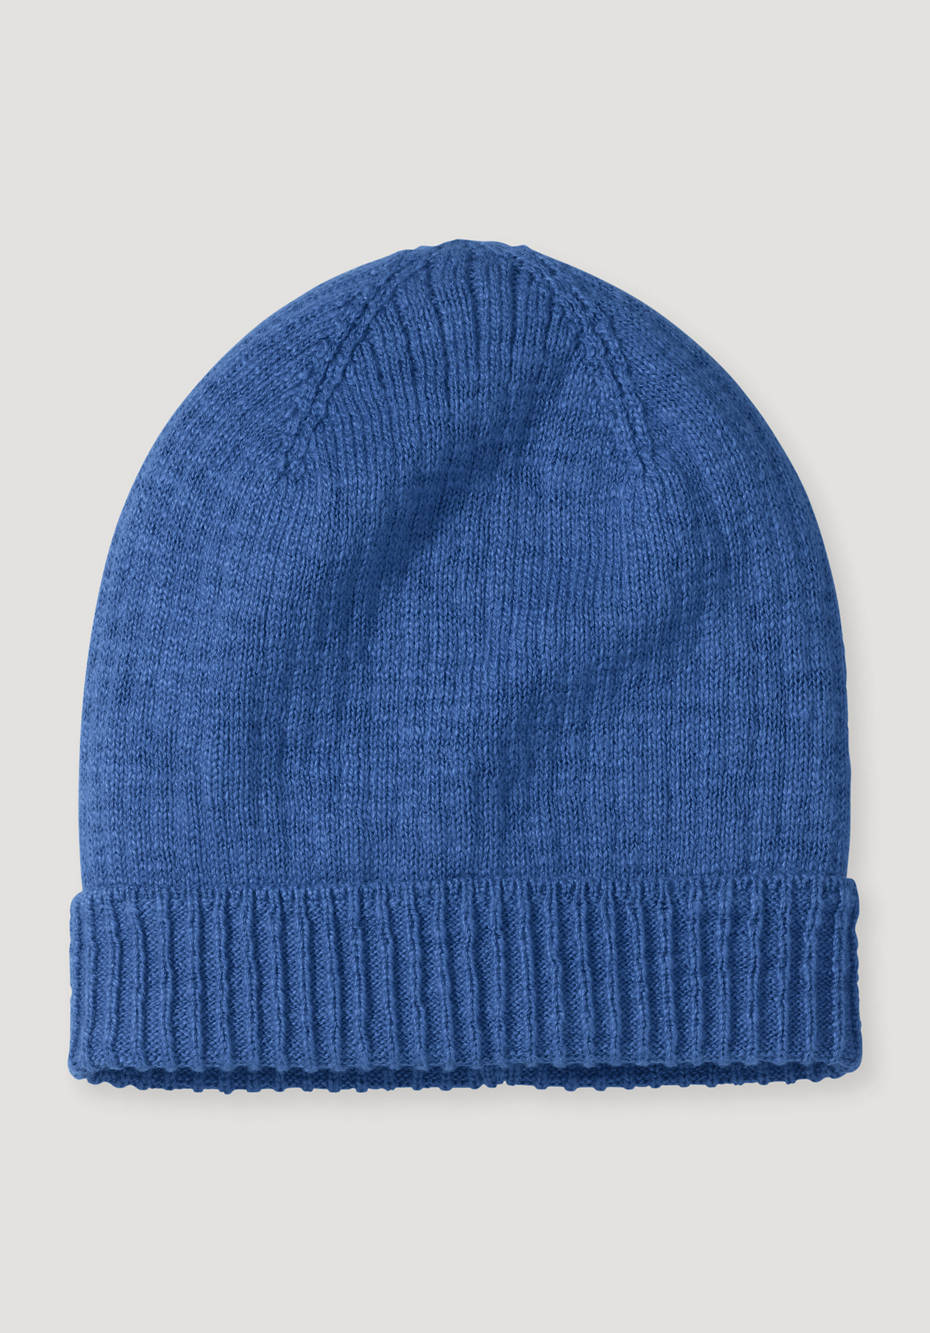 Knitted hat made from pure organic cotton